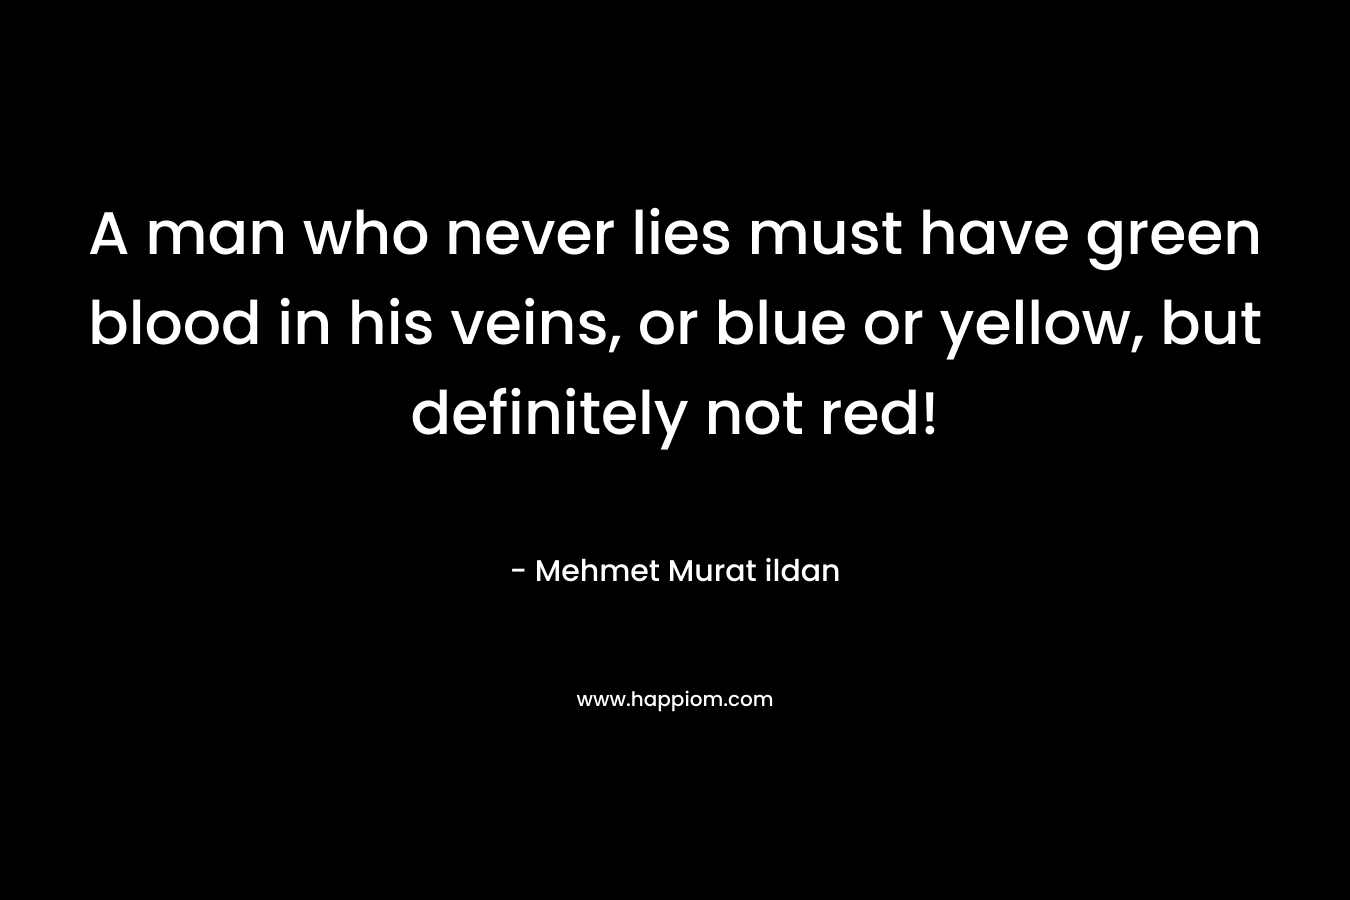 A man who never lies must have green blood in his veins, or blue or yellow, but definitely not red! – Mehmet Murat ildan